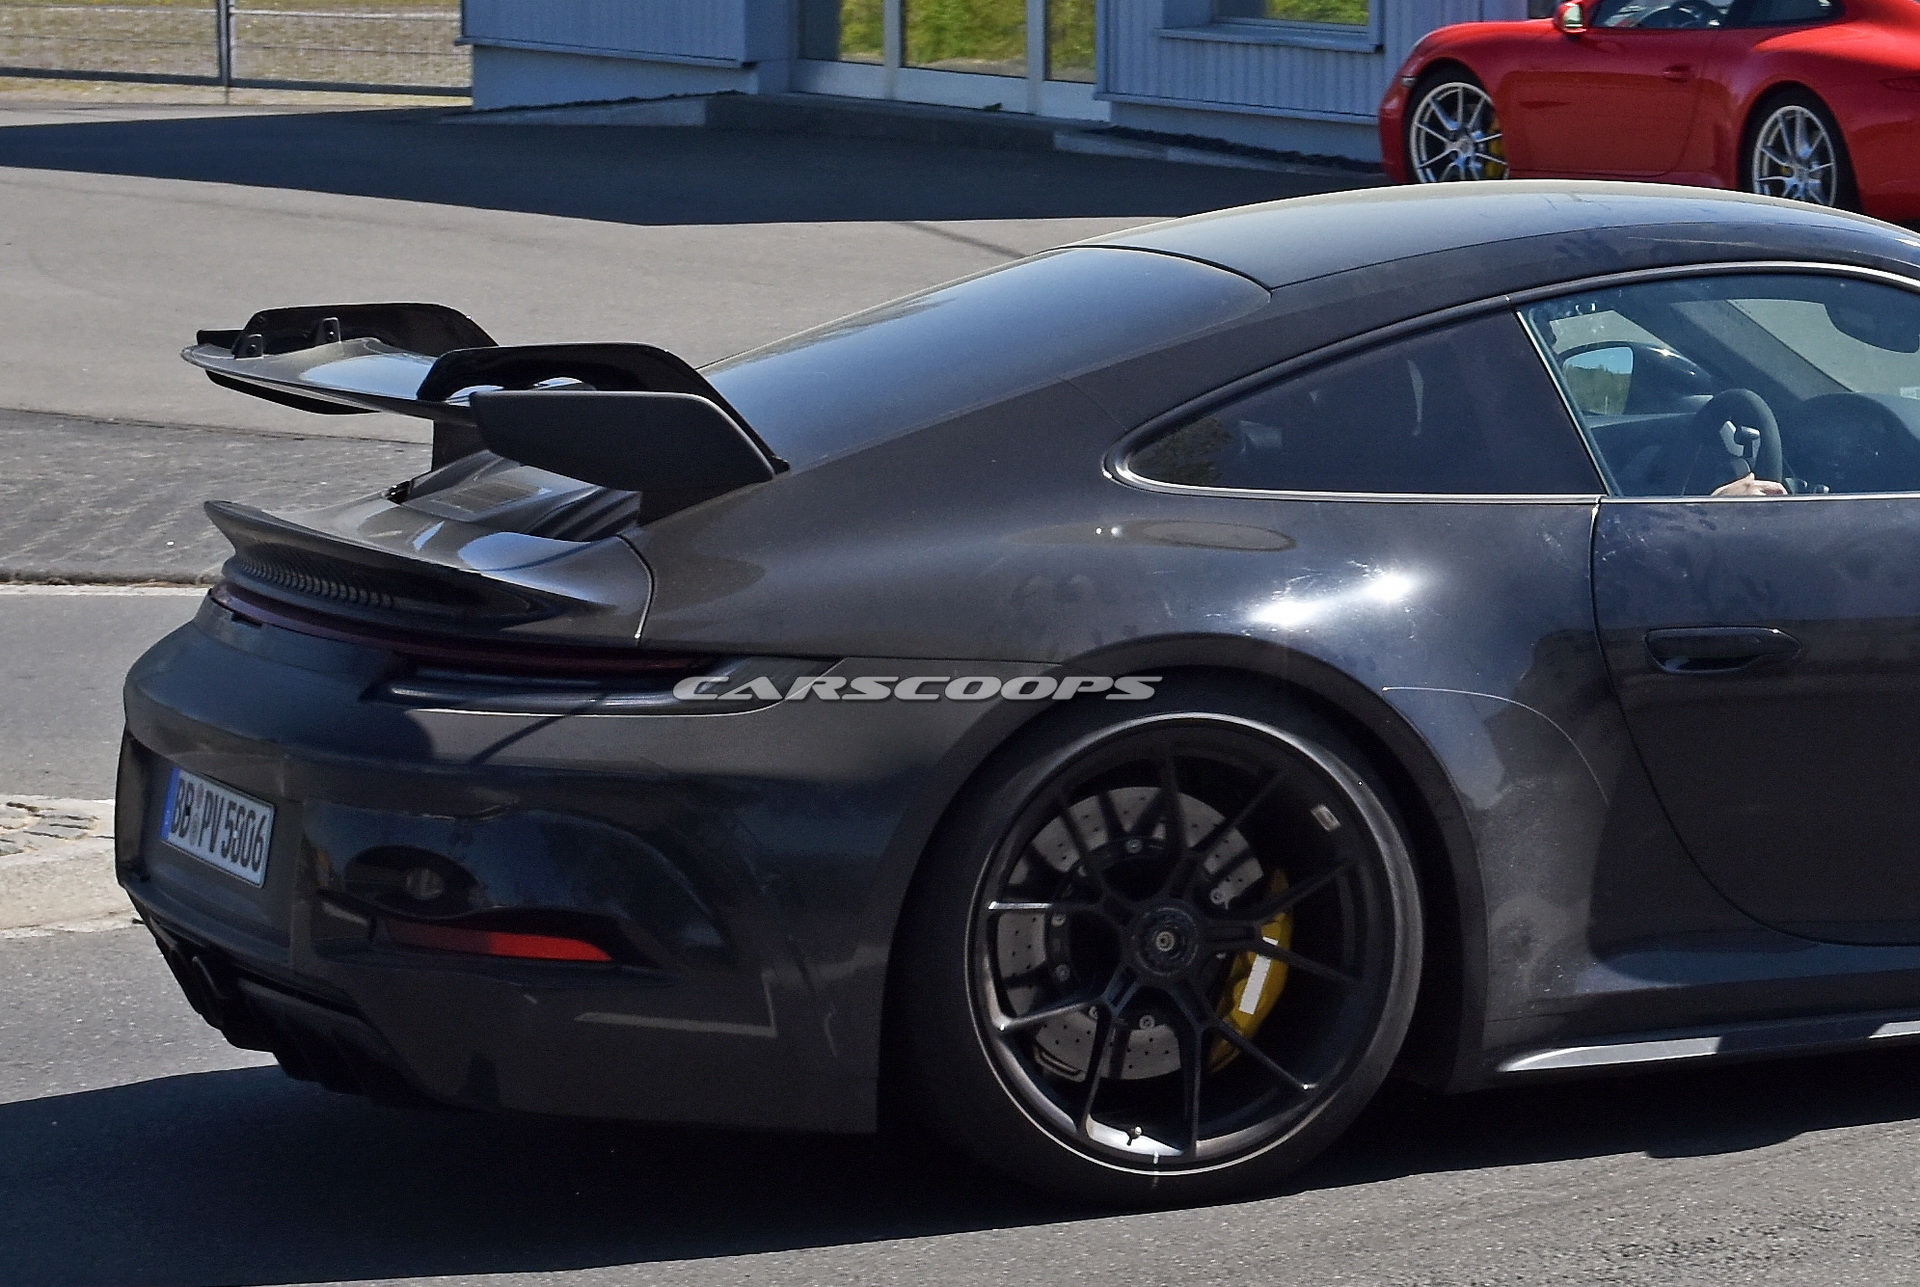 2021 911 Gt3 Most Revealing Spy Shots Yet For Porsche S New Track Weapon Carscoops